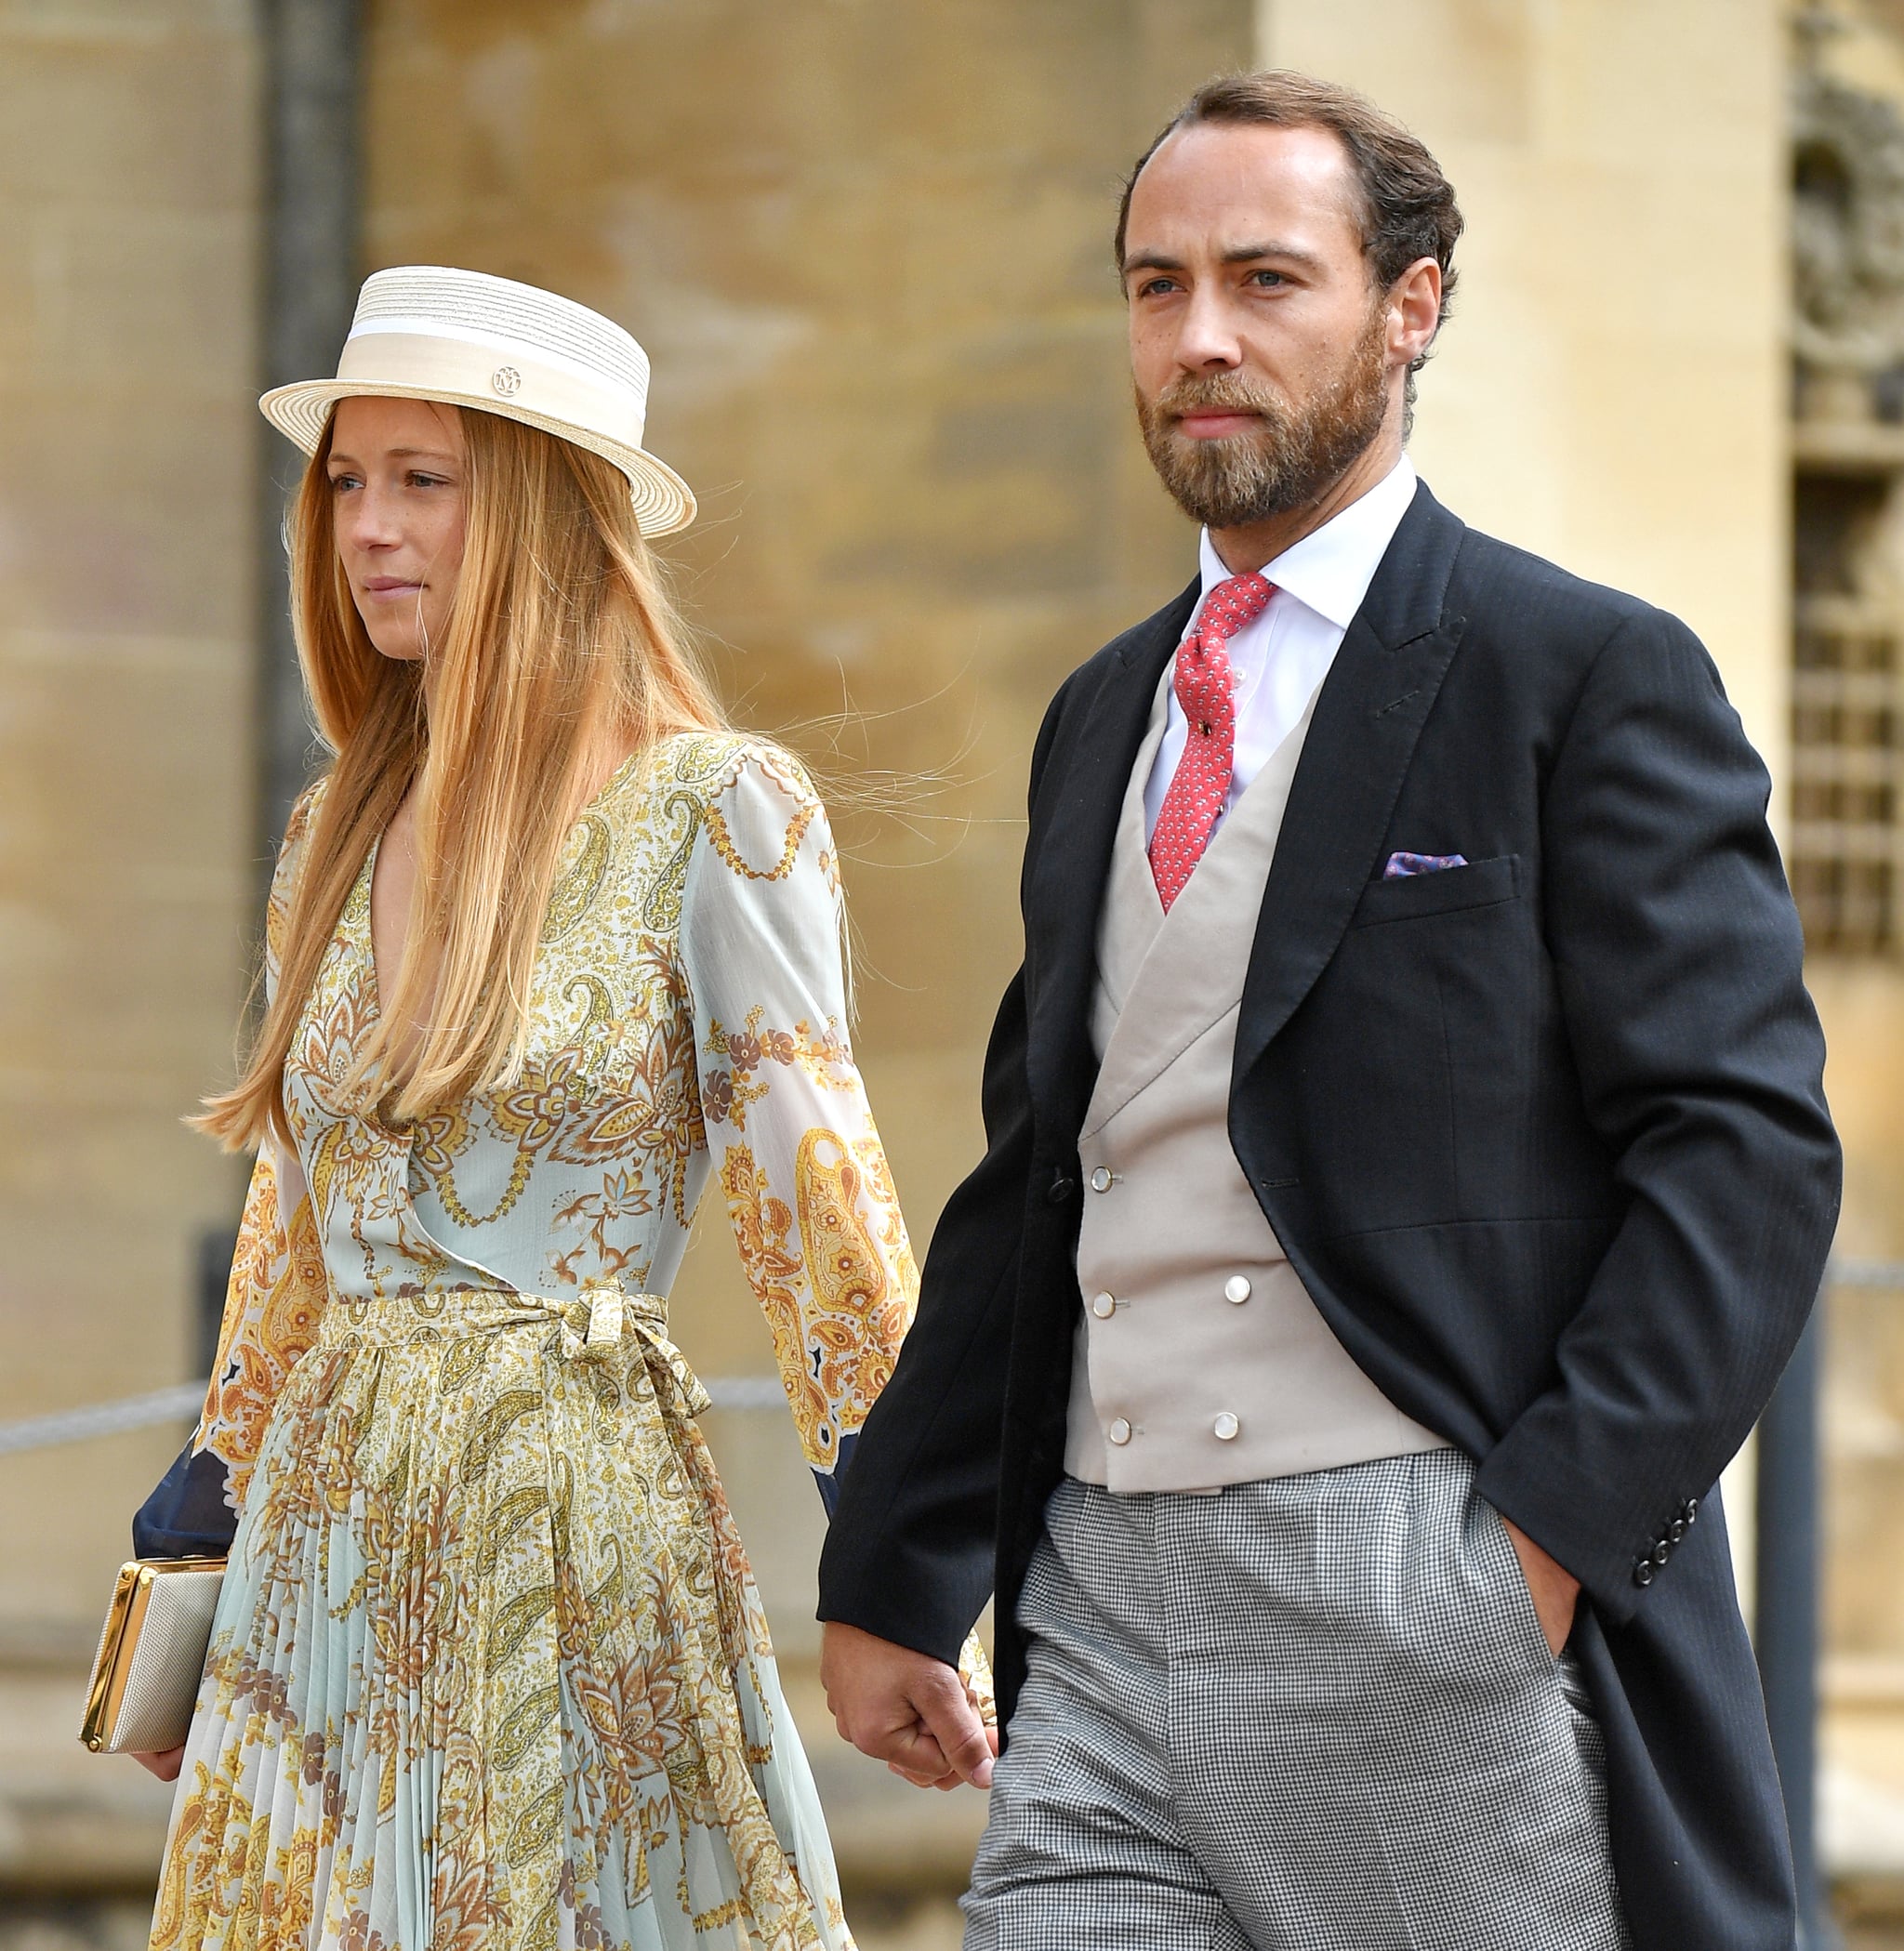 WINDSOR, UNITED KINGDOM - MAY 18: (EMBARGOED FOR PUBLICATION IN UK NEWSPAPERS UNTIL 24 HOURS AFTER CREATE DATE AND TIME) Alizee Thevenet and James Middleton attend the wedding of Lady Gabriella Windsor and Thomas Kingston at St George's Chapel on May 18, 2019 in Windsor, England. (Photo by Pool/Max Mumby/Getty Images)